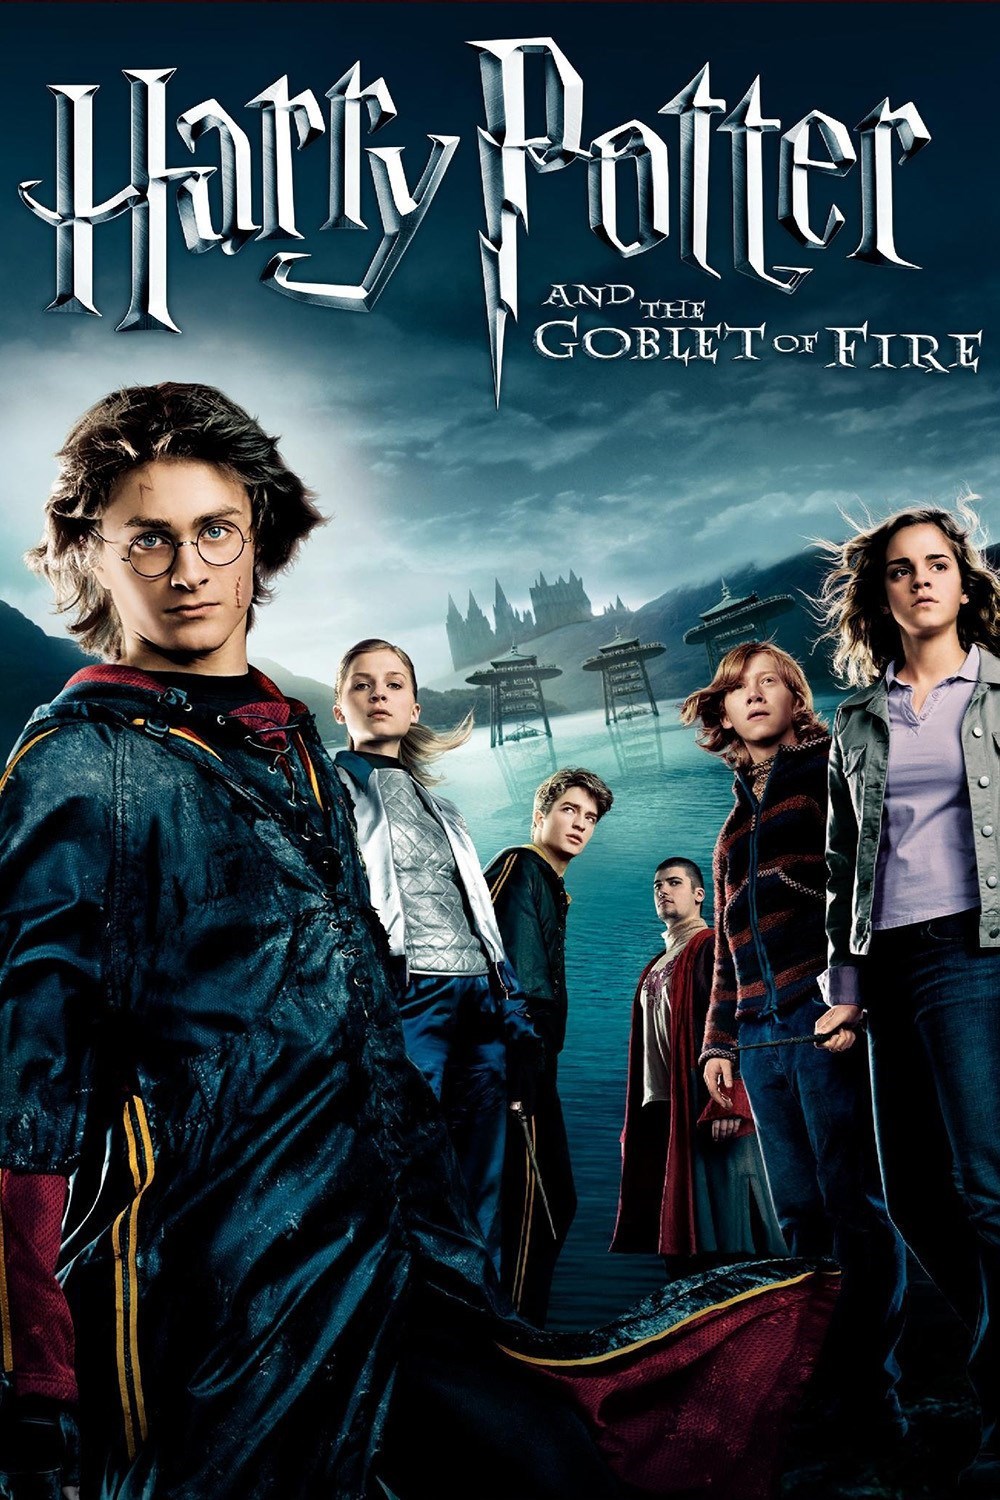 Harry Potter And The Goblet Of Fire Backgrounds on Wallpapers Vista